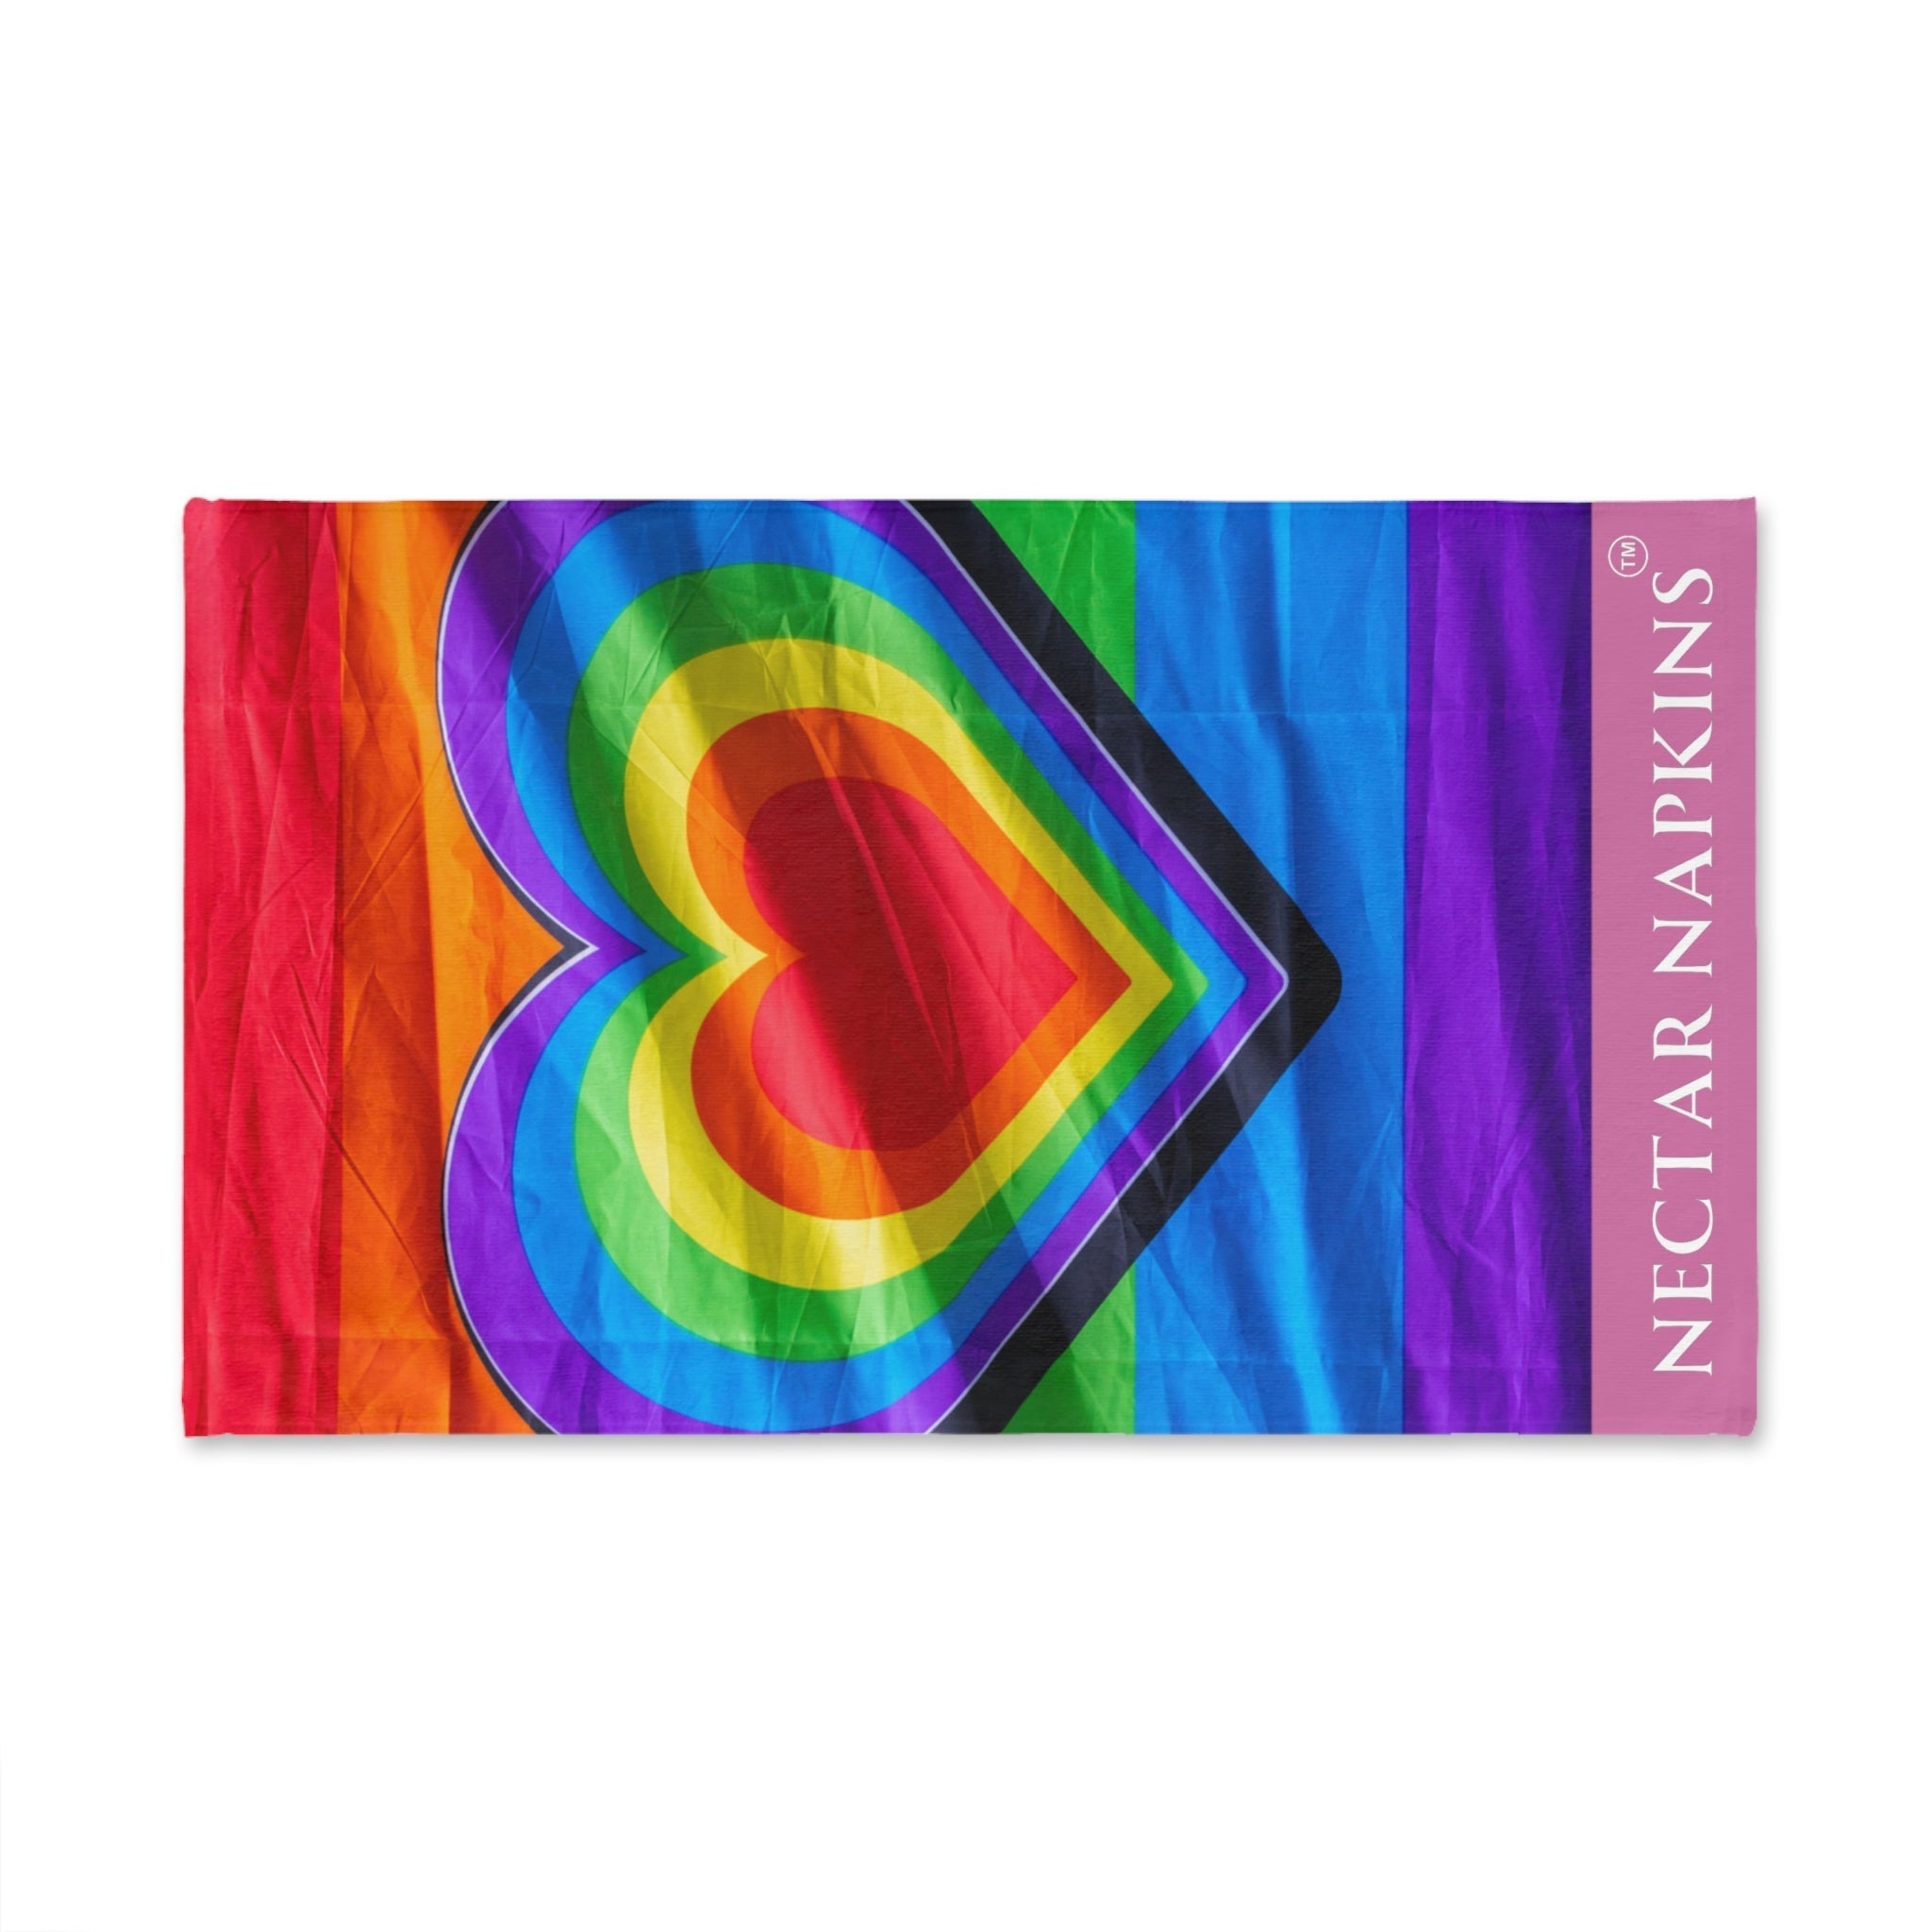 Rain Bow Heart 3DPink | Novelty Gifts for Boyfriend, Funny Towel Romantic Gift for Wedding Couple Fiance First Year Anniversary Valentines, Party Gag Gifts, Joke Humor Cloth for Husband Men BF NECTAR NAPKINS